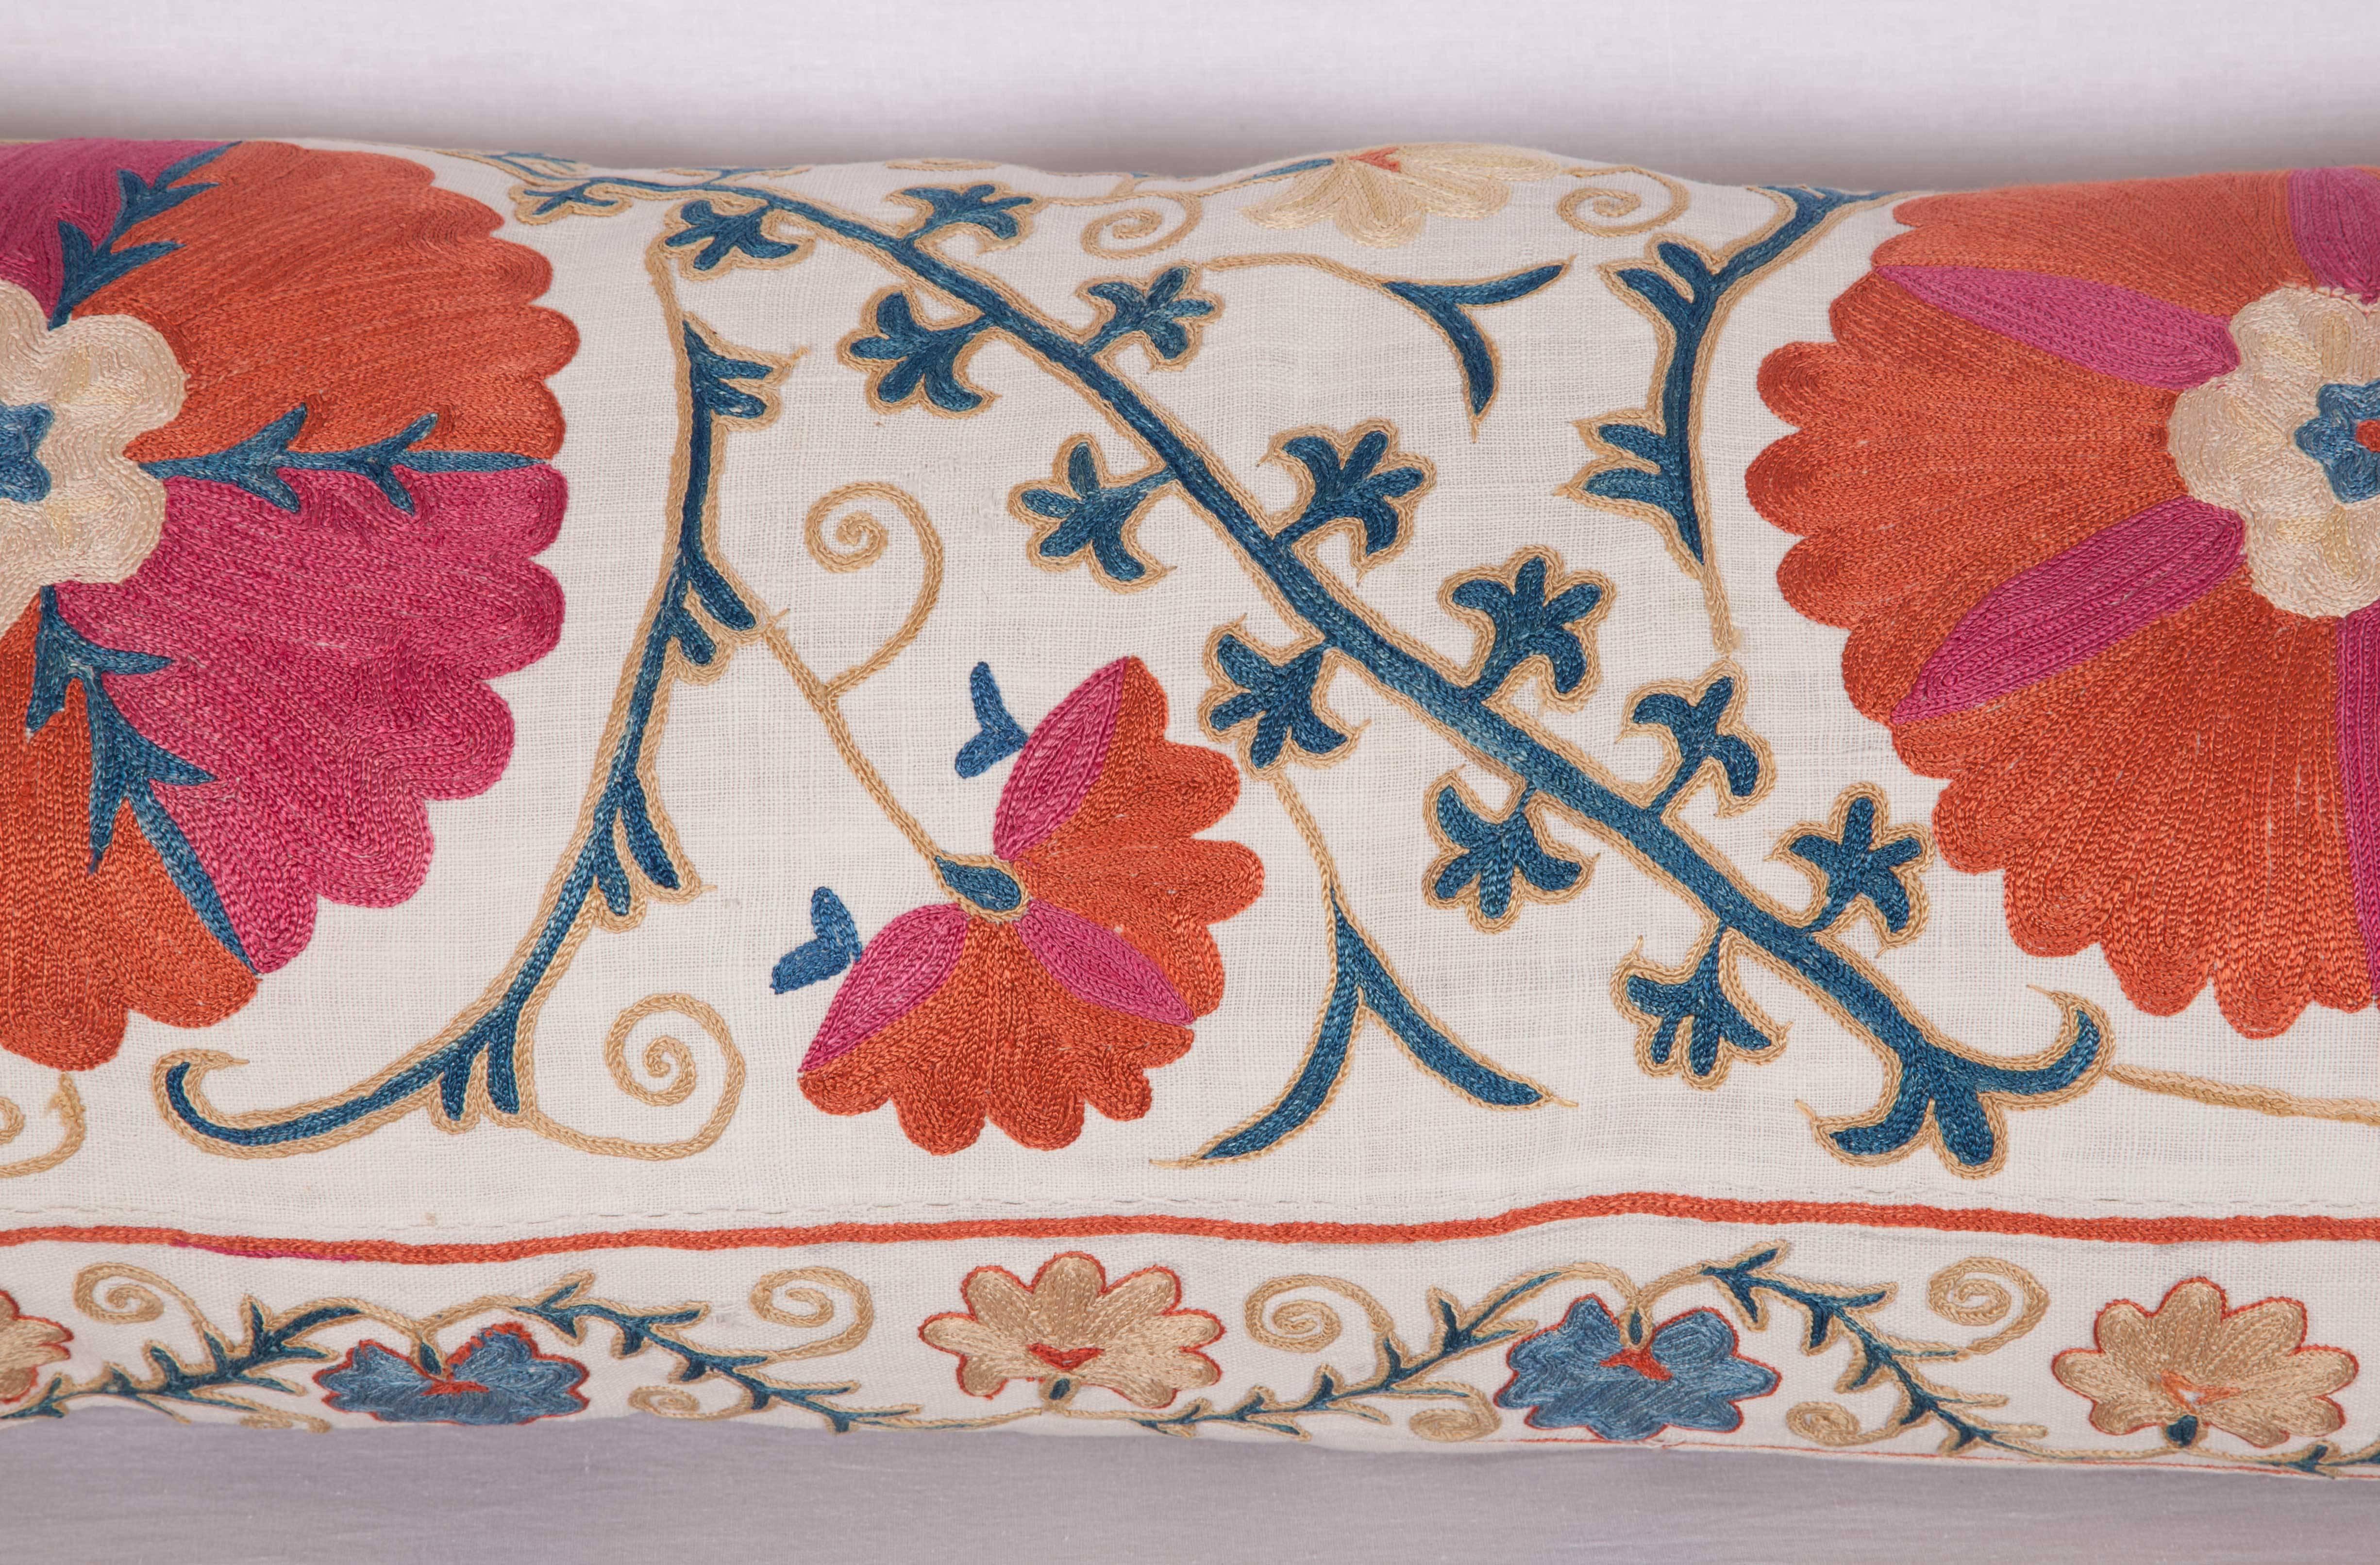 Embroidered Antique Pillow Made Out of a 19th Century Uzbek Bukhara Suzani